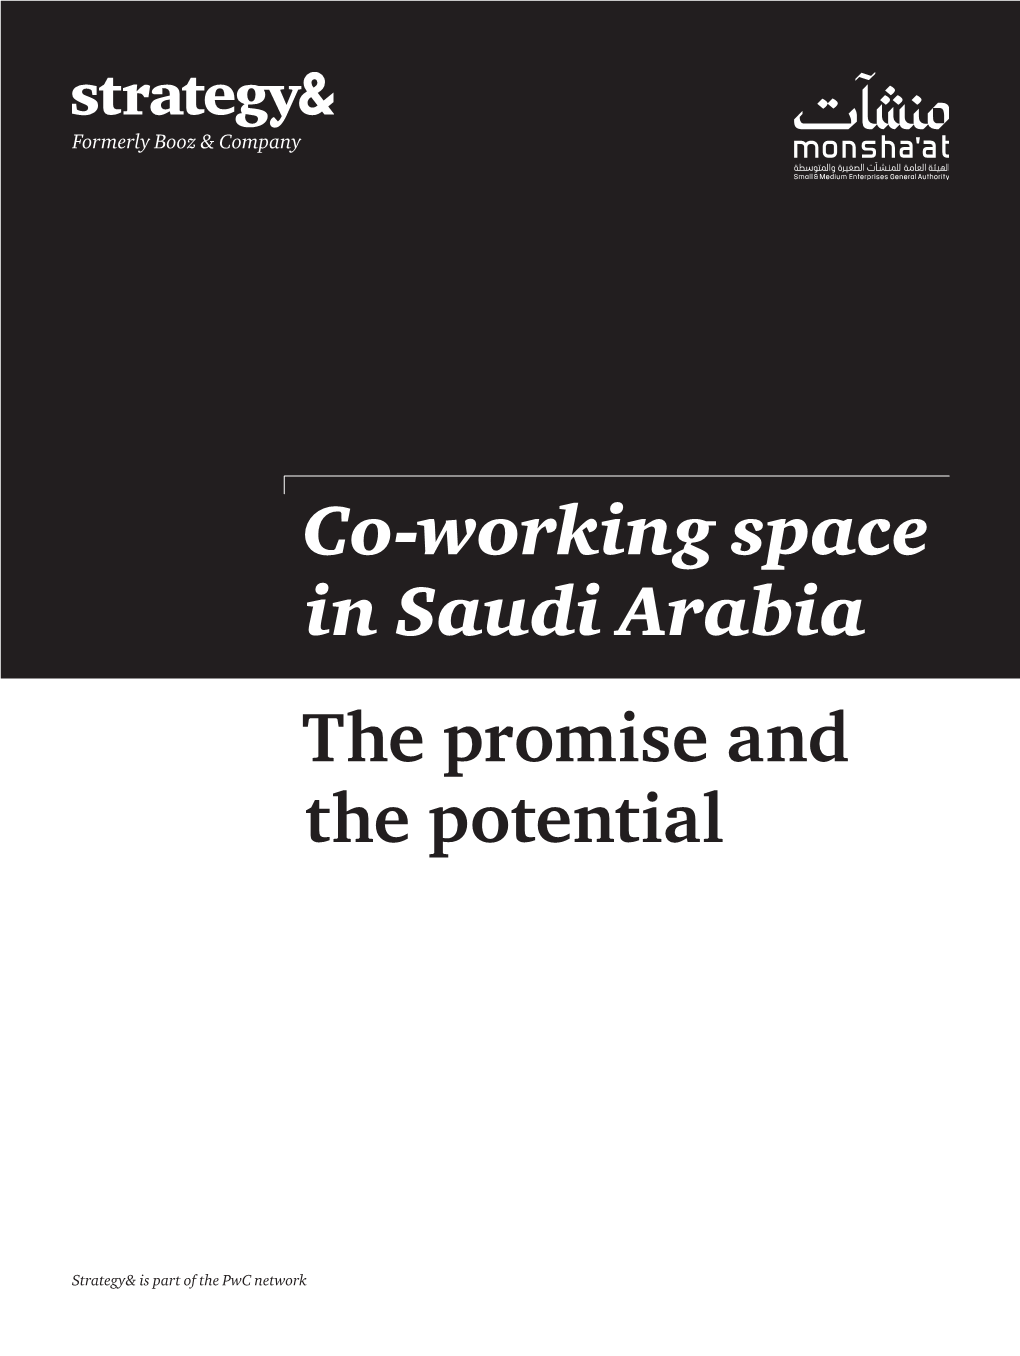 Co-Working Space in Saudi Arabia the Promise and the Potential